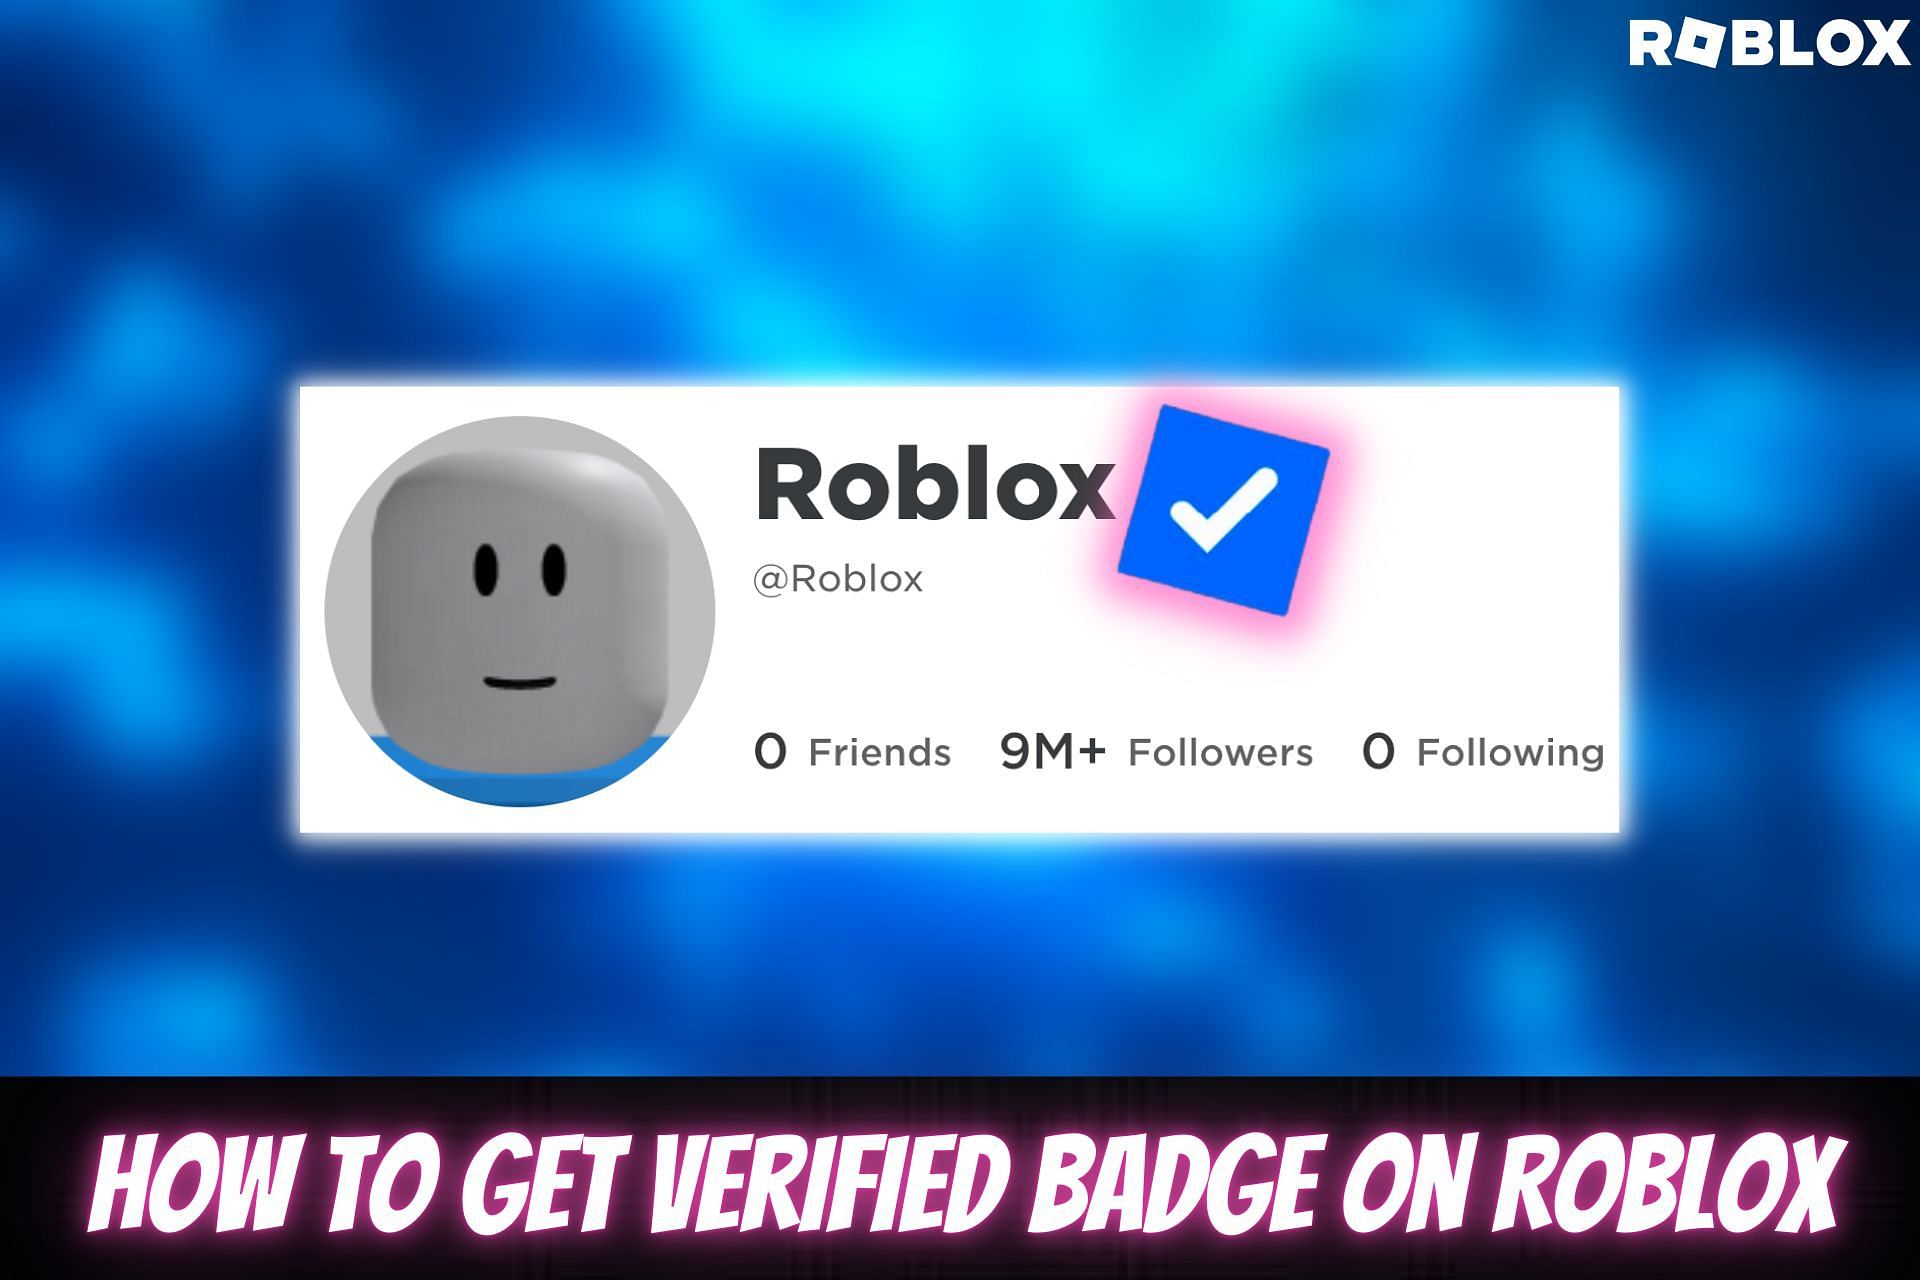 What does this bag with a checkmark on it next to Roblox usernames